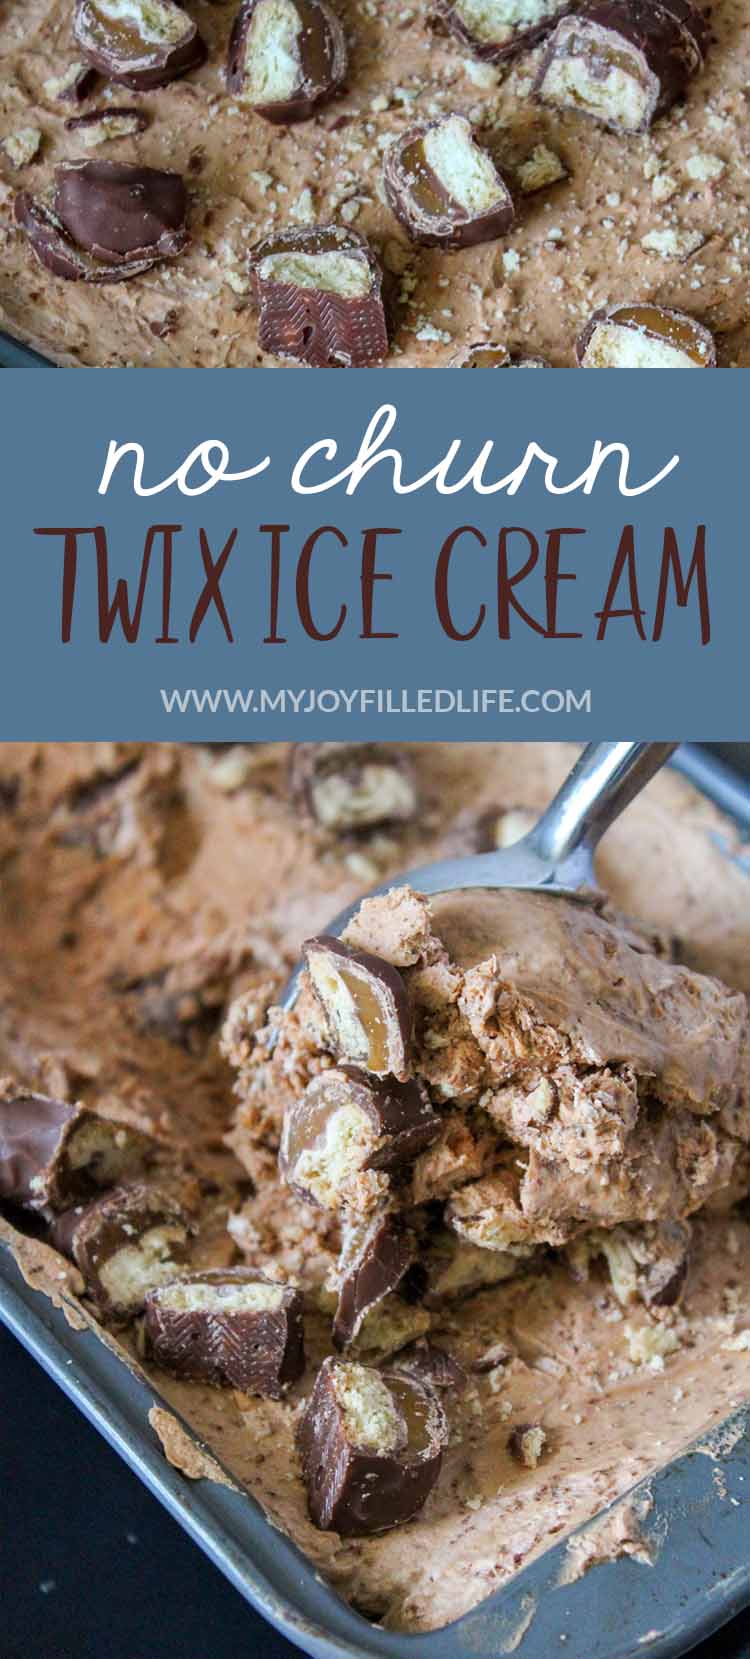 This no-churn Twix bar ice cream recipe is the perfect frozen treat for summer! It's such an easy recipe that everyone will absolutely love! #icecream #twixbar #summertreat #homemadeicecream